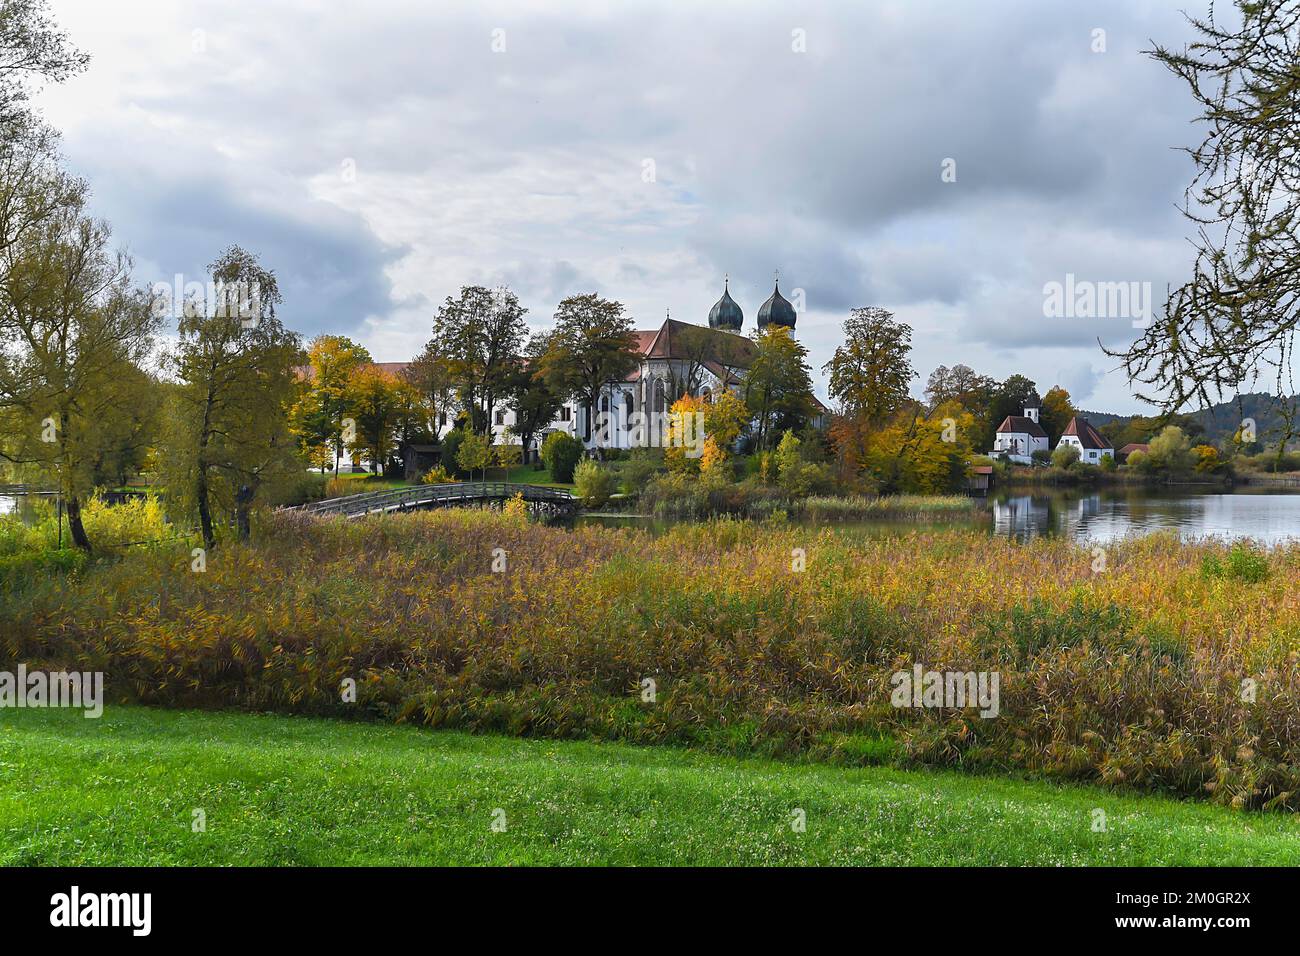 Seeon Monastery with St. Lambert's Monastery Church, on the left a wooden bridge over the Klostersee, Seeon, Chiemgau, Bavaria, Germany, Europe Stock Photo